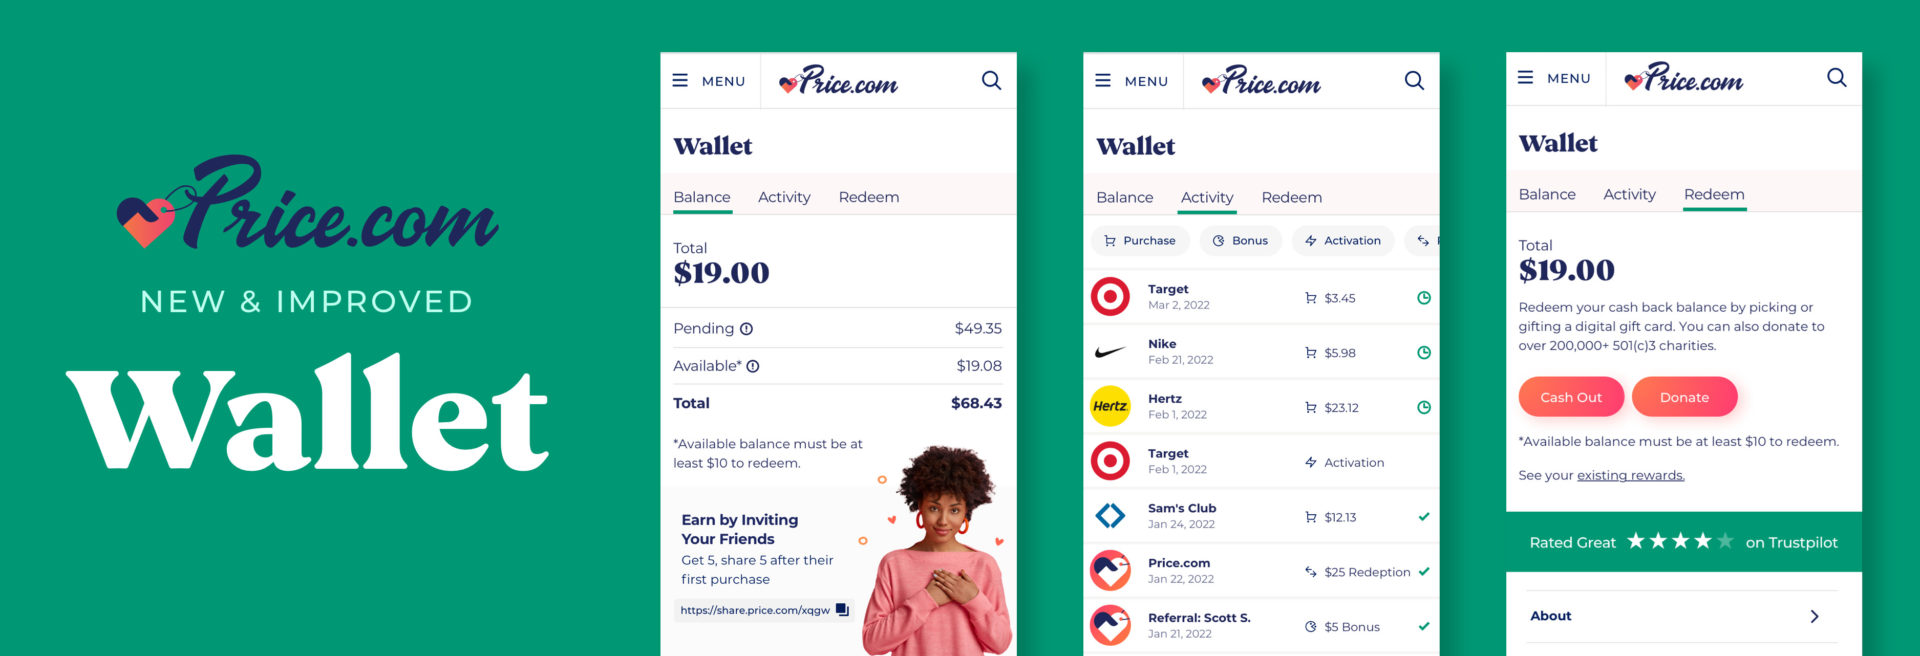 Price.com New and Improved Wallet